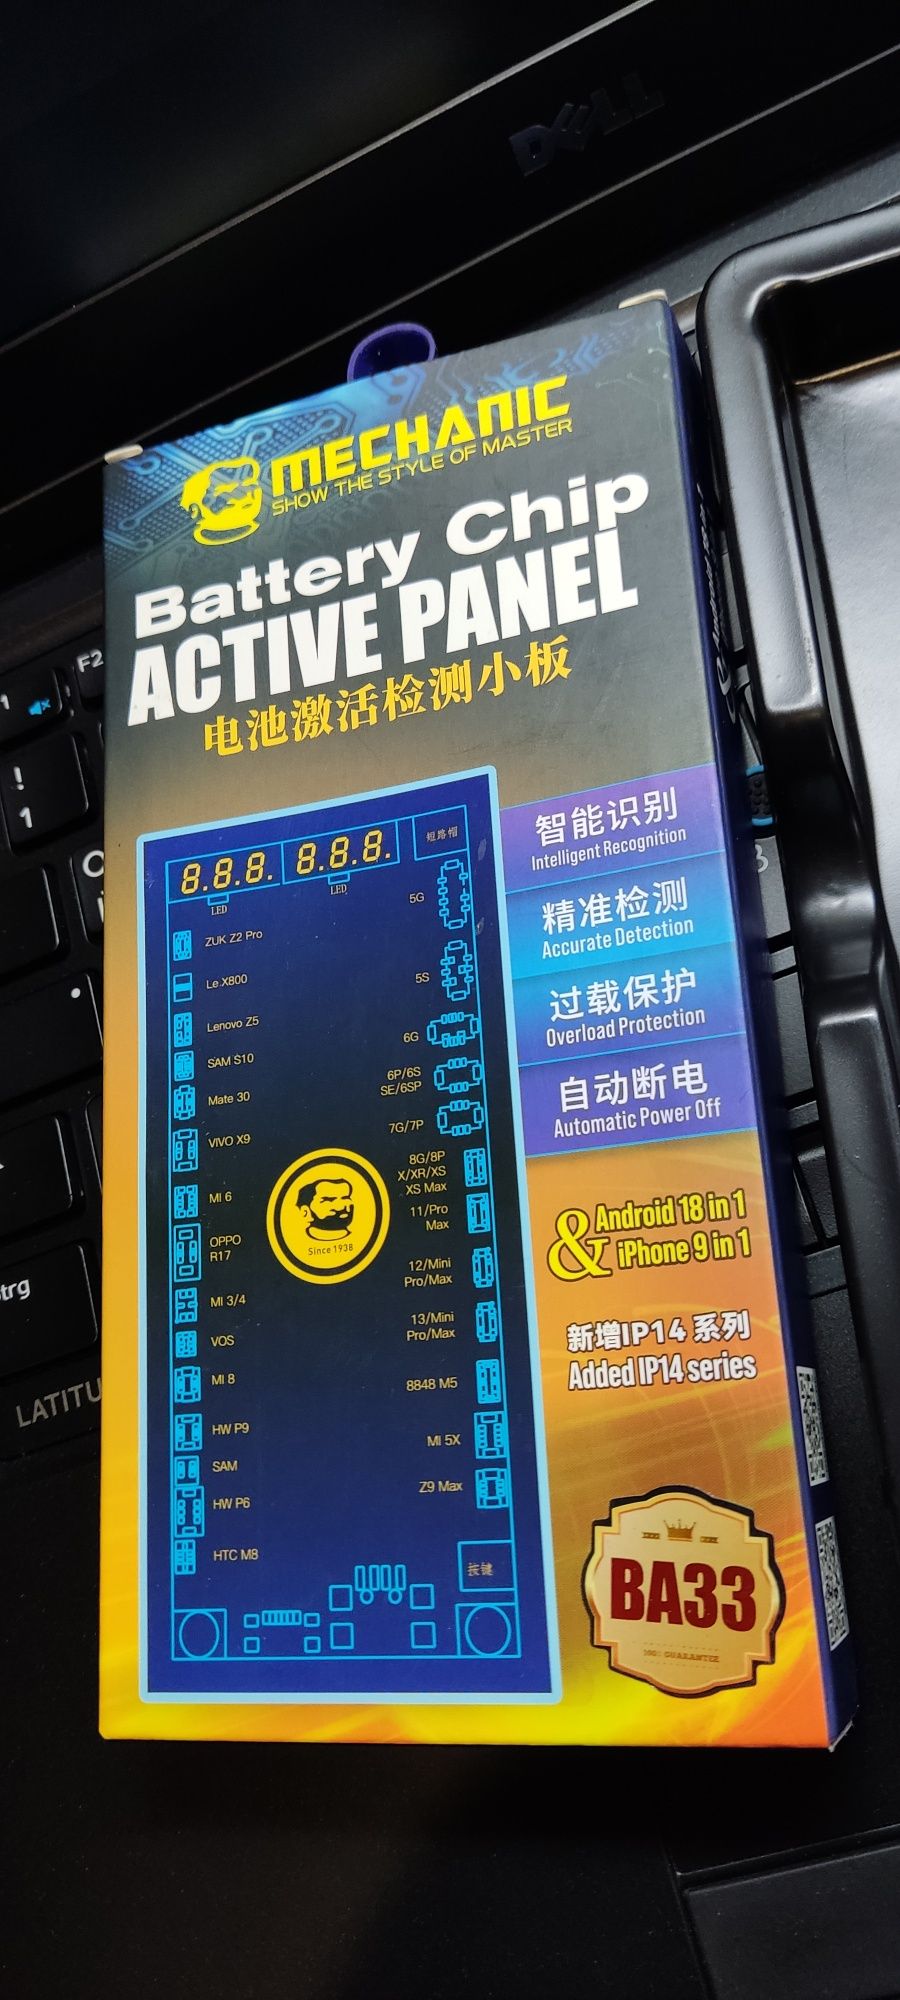 Battery chip active panel